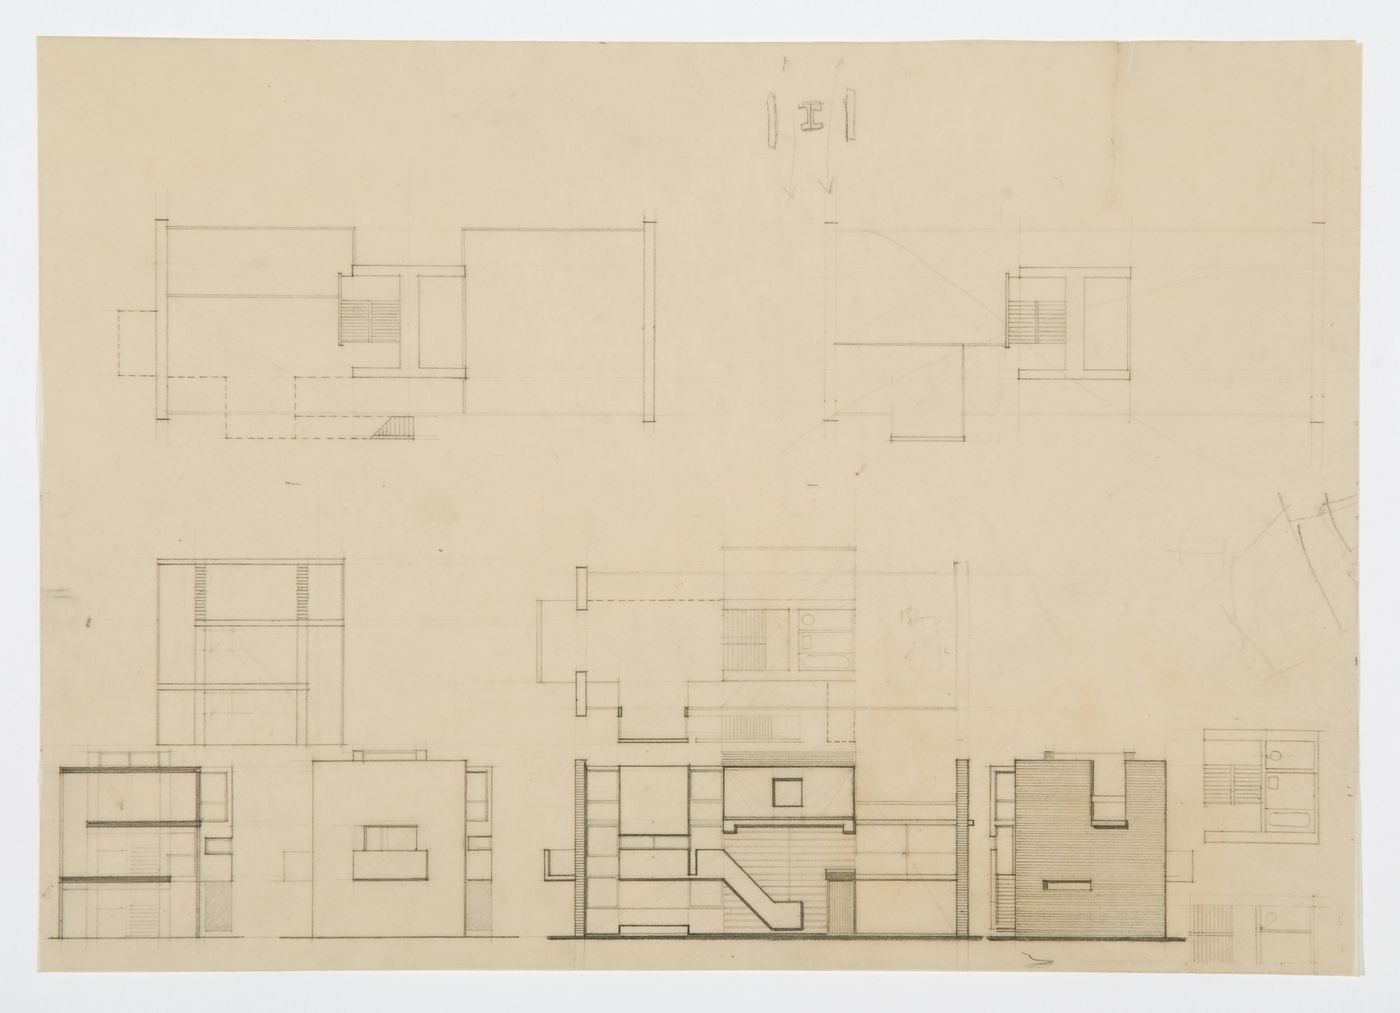 Core and Crosswall House, United Kingdom: plans, sections and elevations